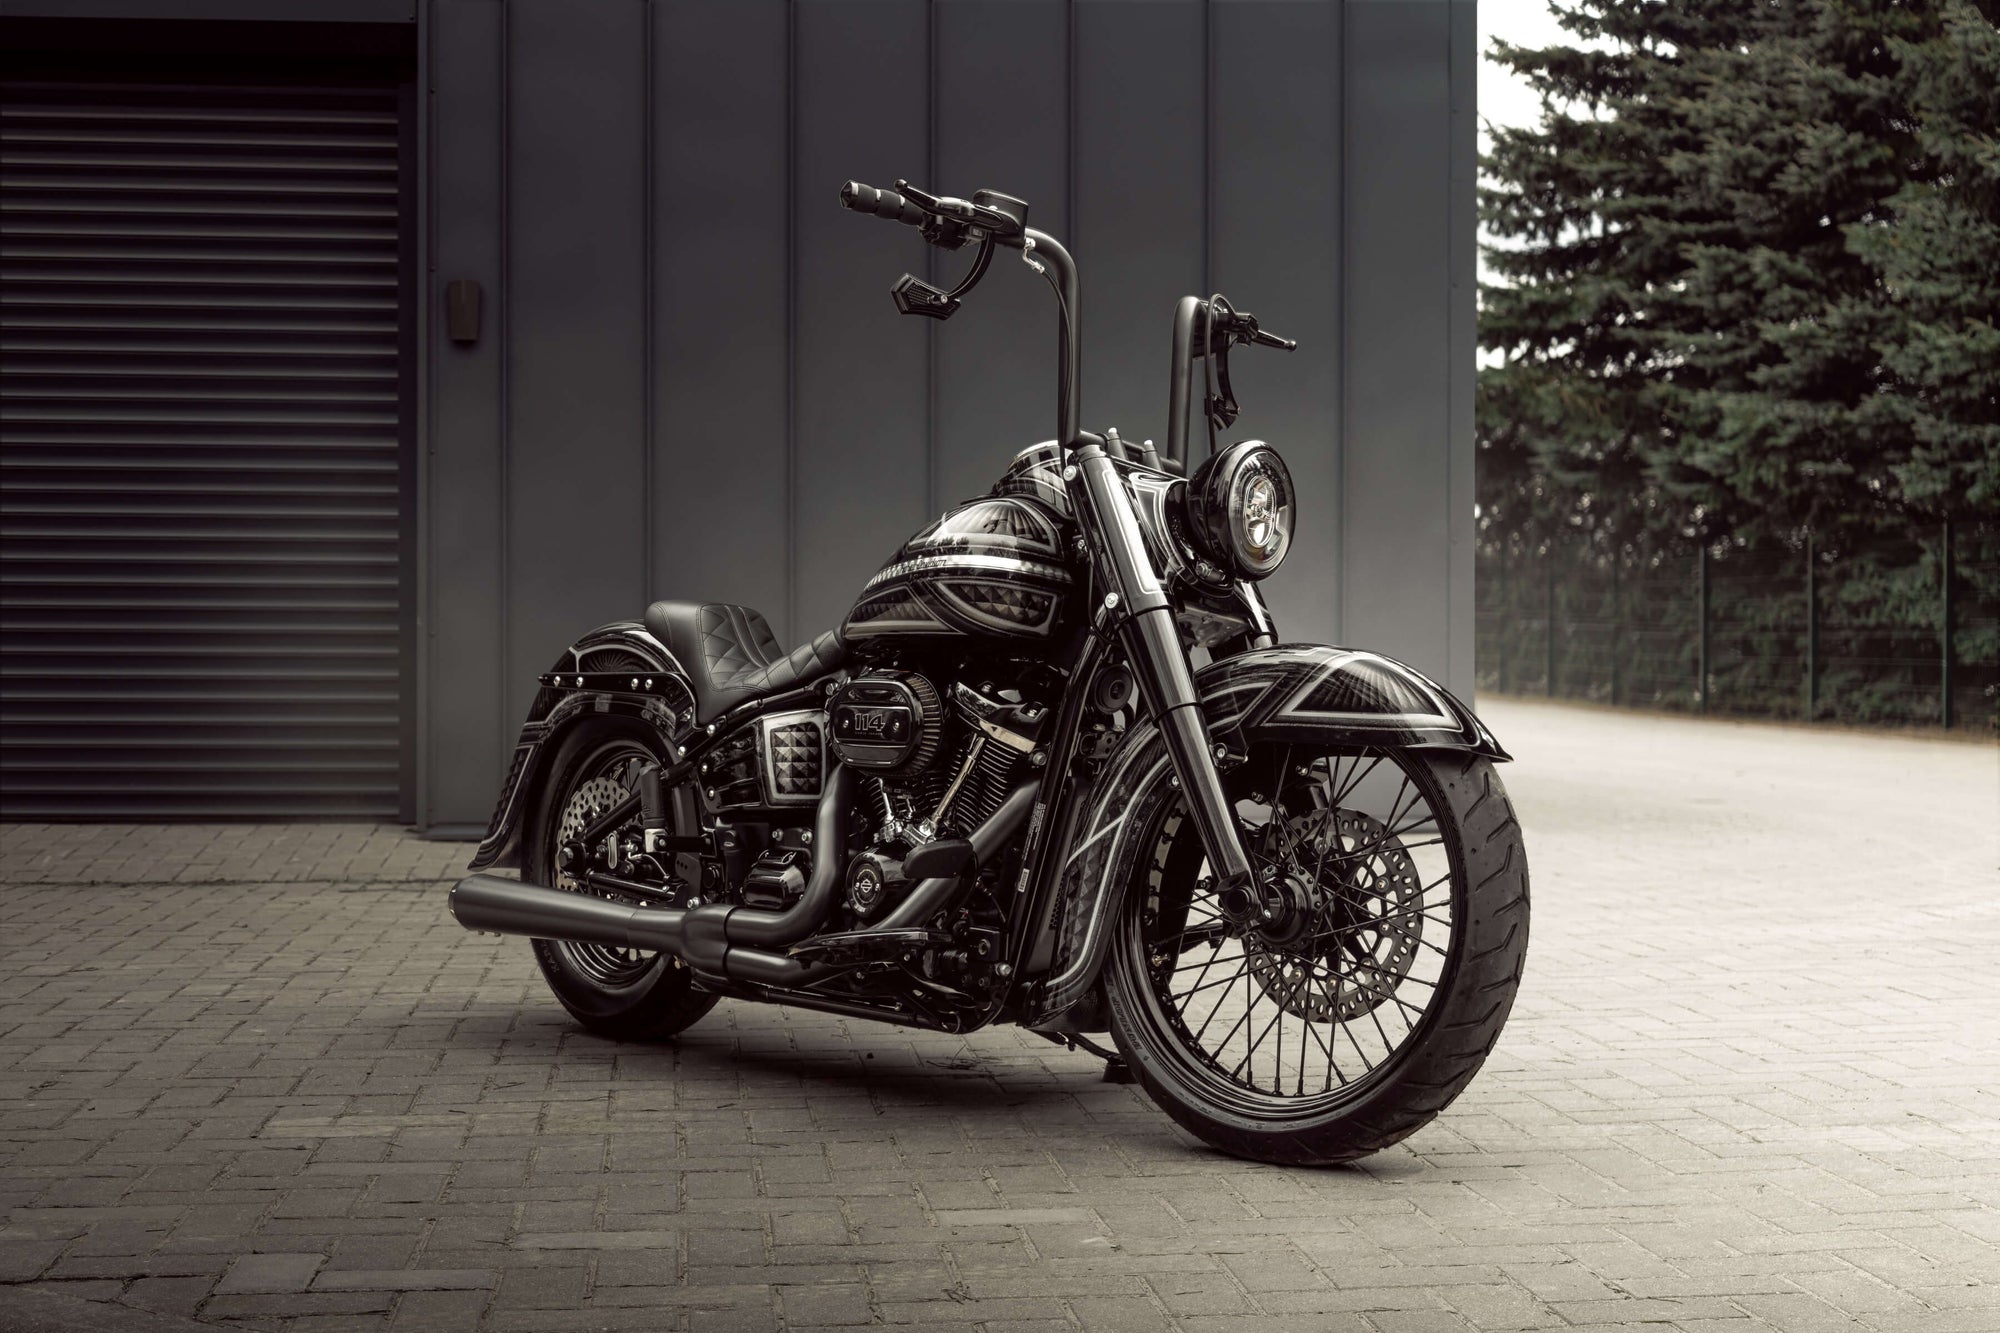 Harley Davidson motorcycle with Killer Custom parts from the side with some trees and a grey wall in the background